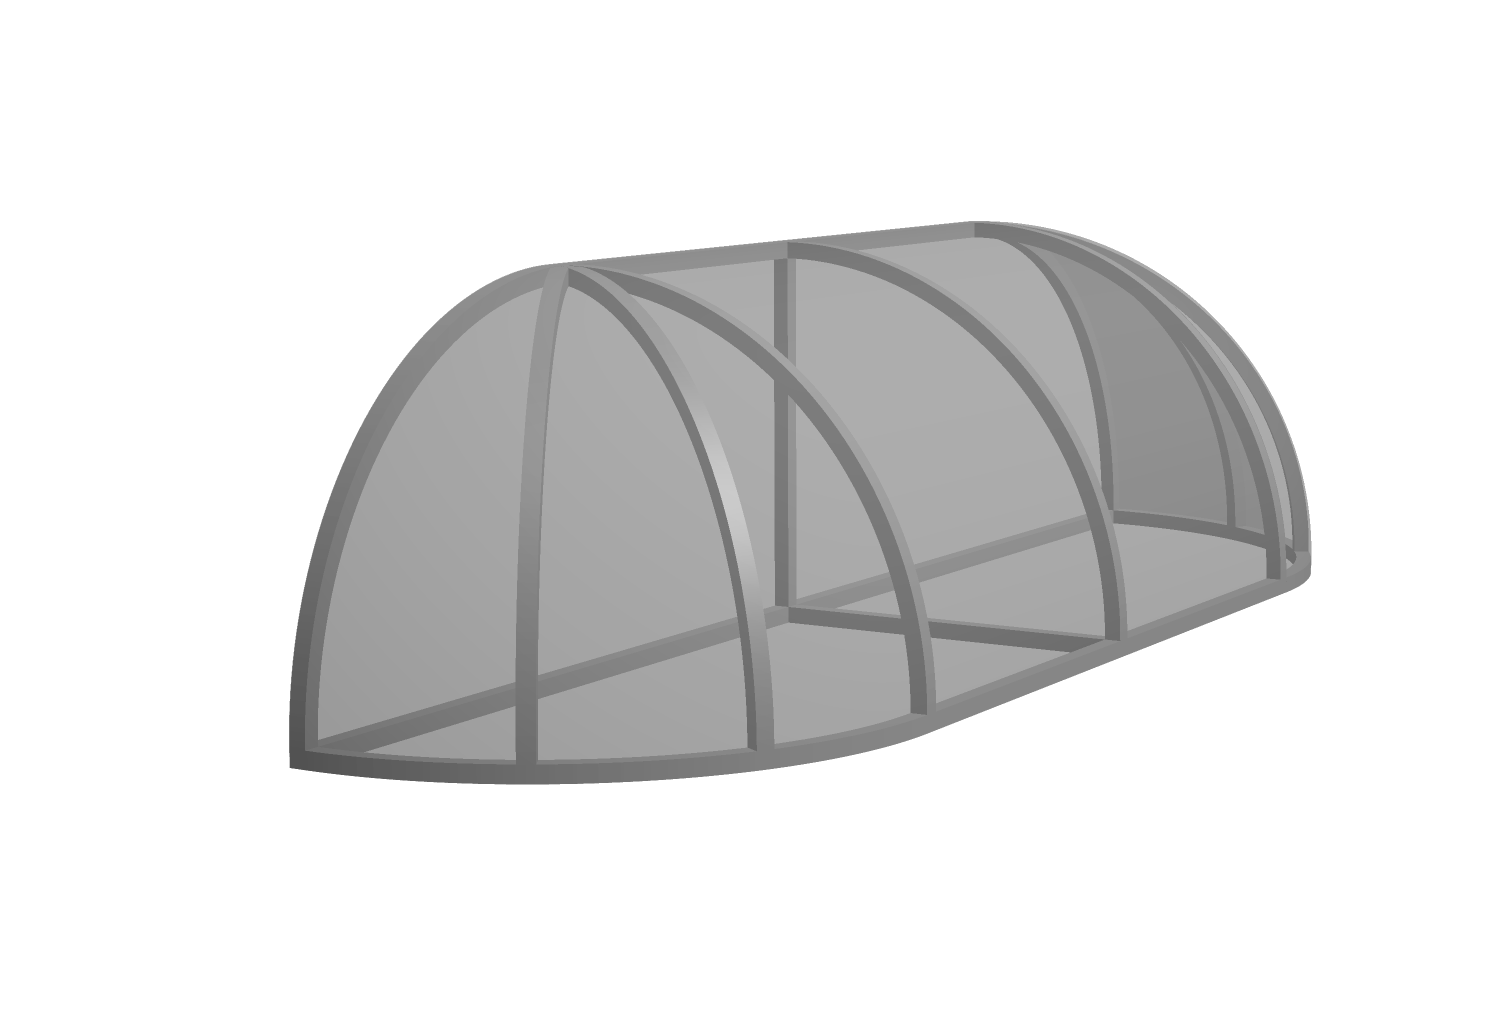 3D model of a elongated dome awning